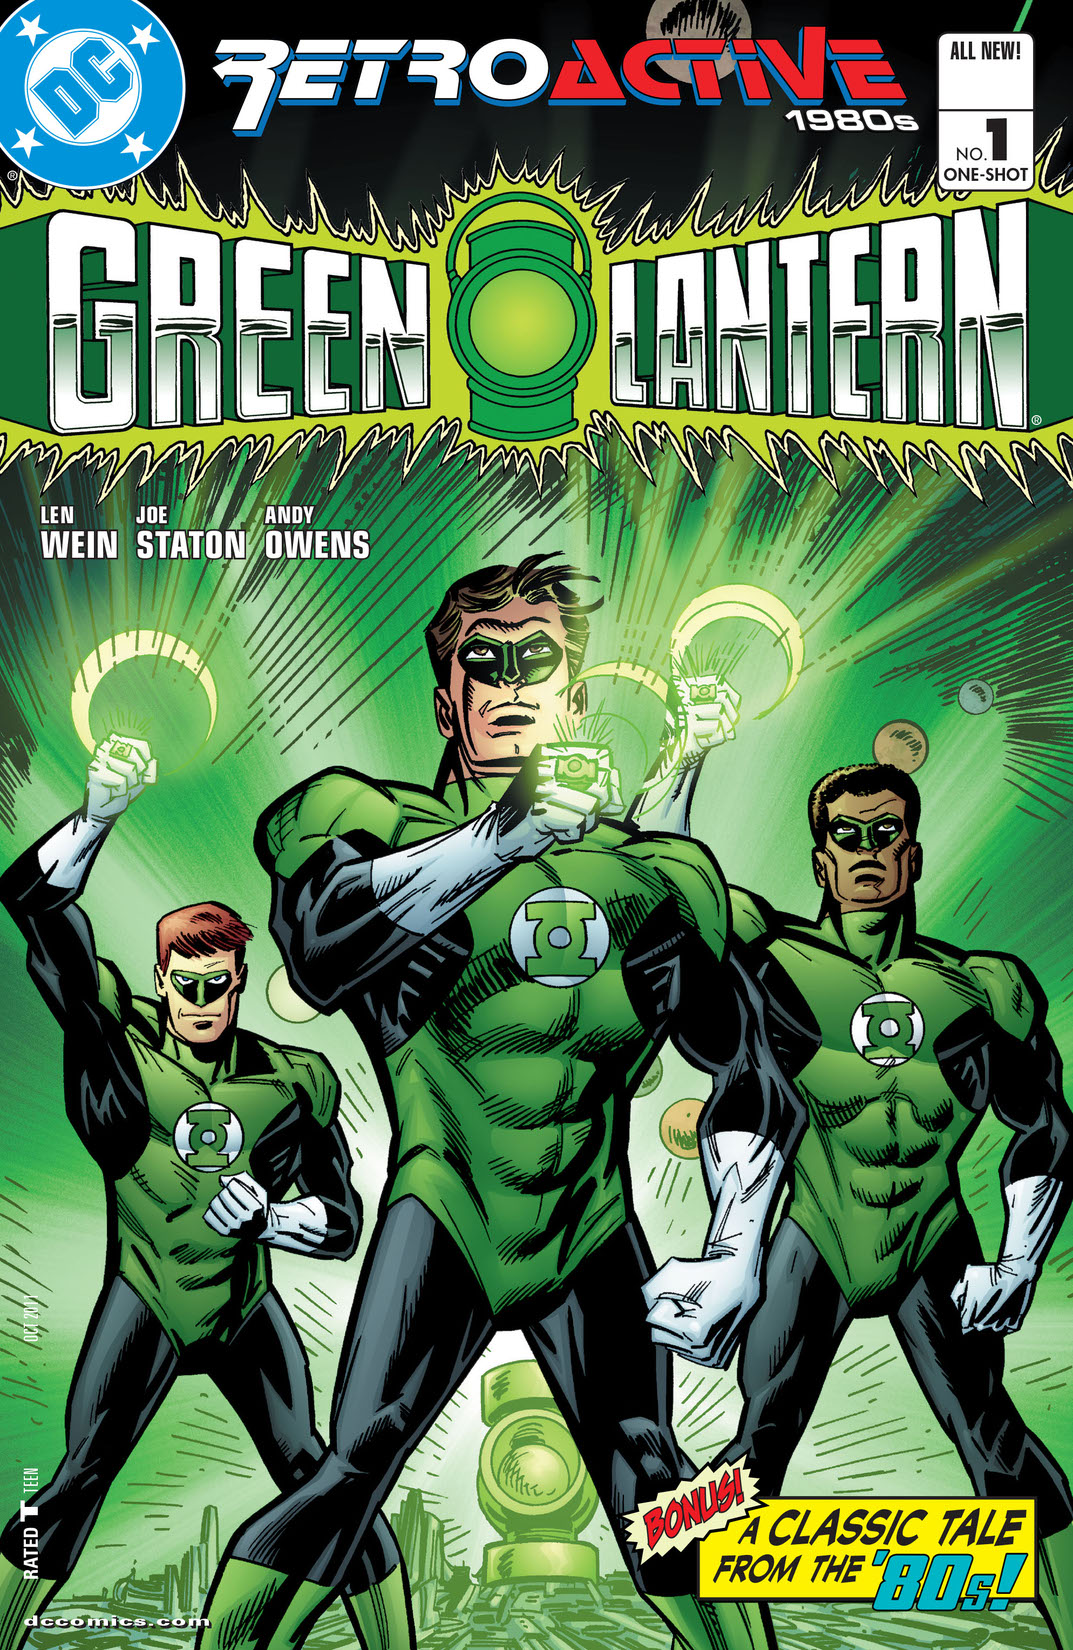 DC Retroactive: Green Lantern - The '80s #1 preview images